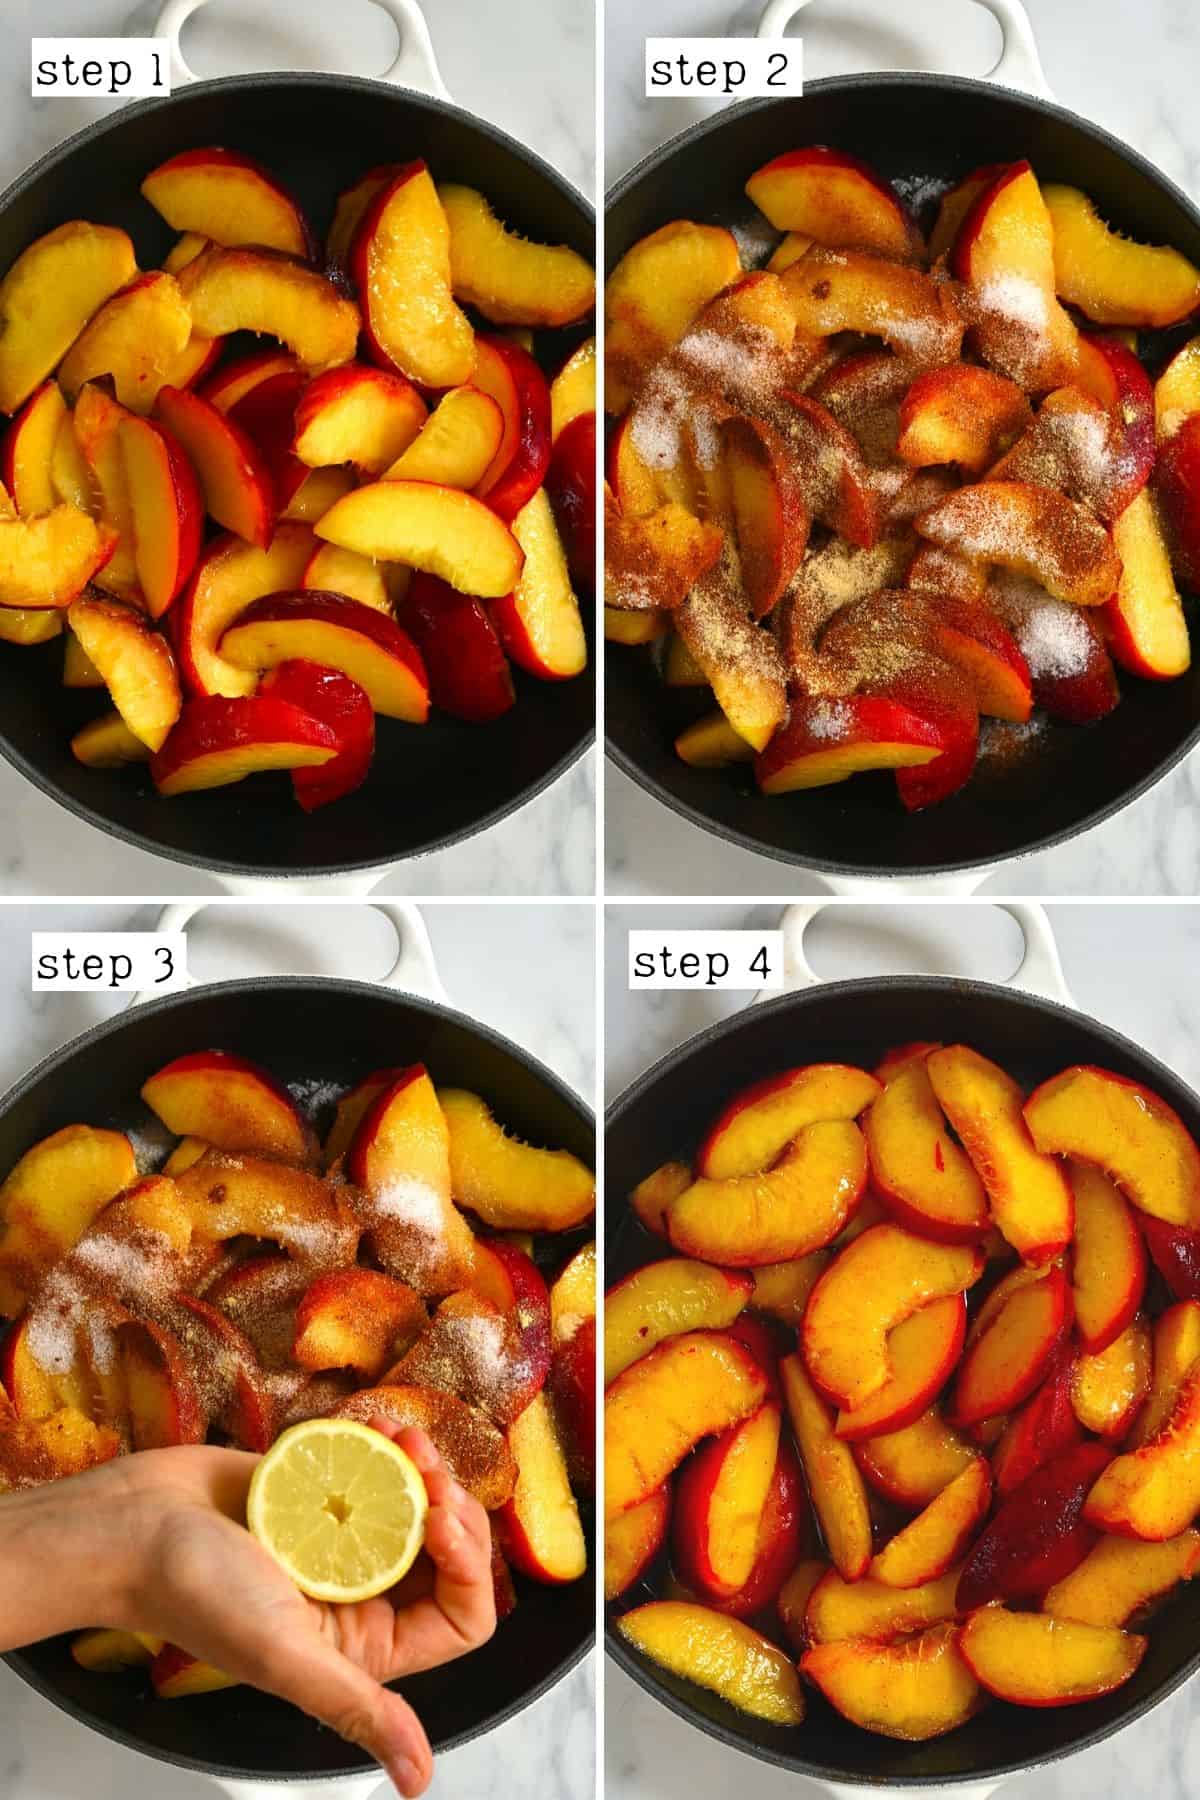 Steps for preparing peaches for crumble